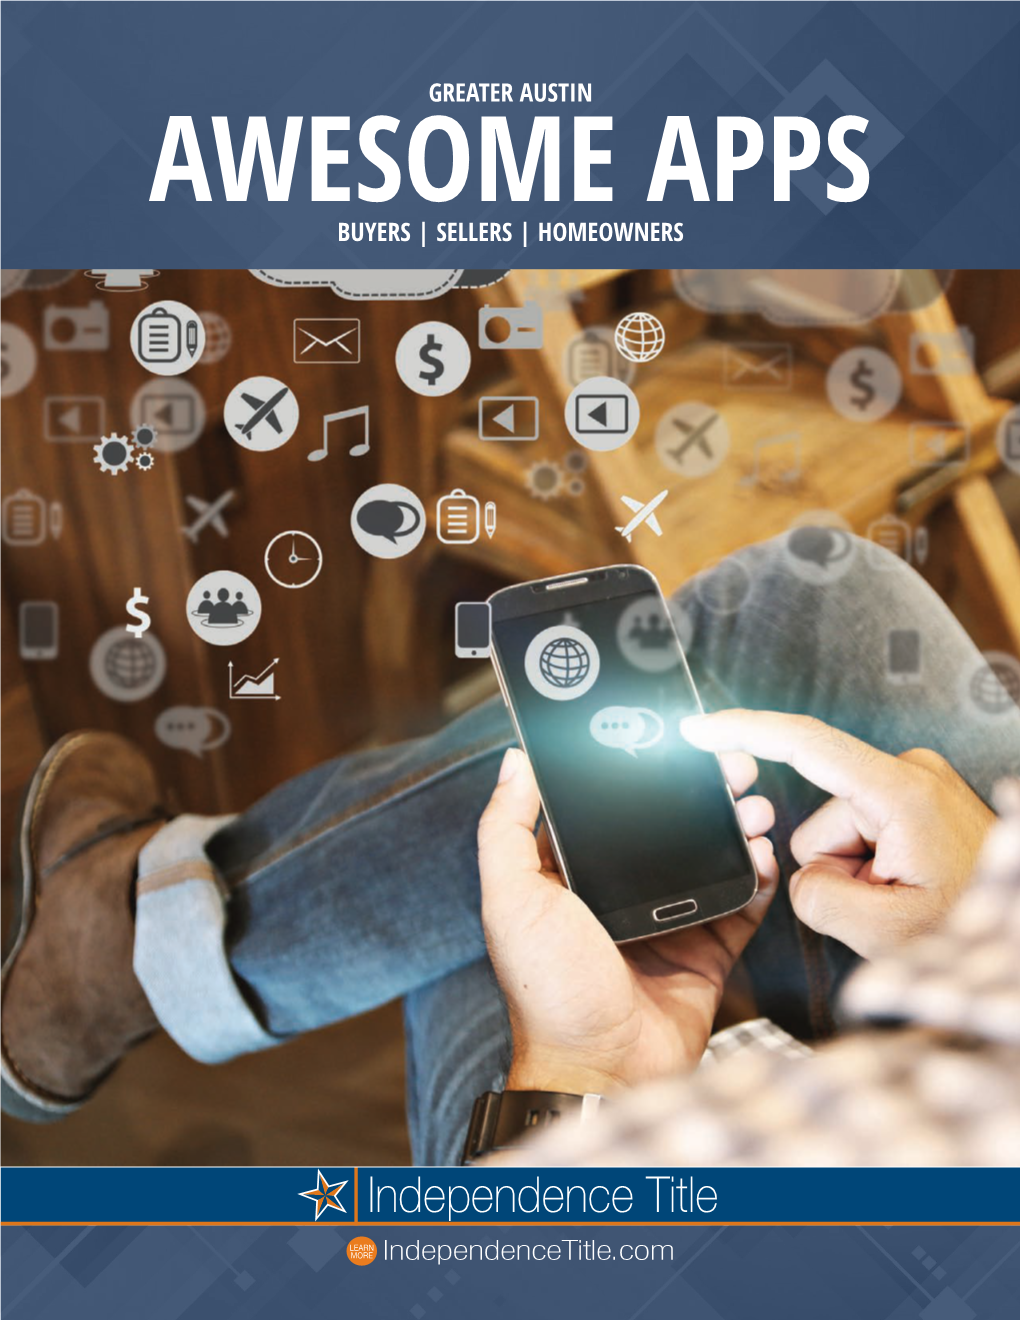 Awesome Apps Buyers | Sellers | Homeowners